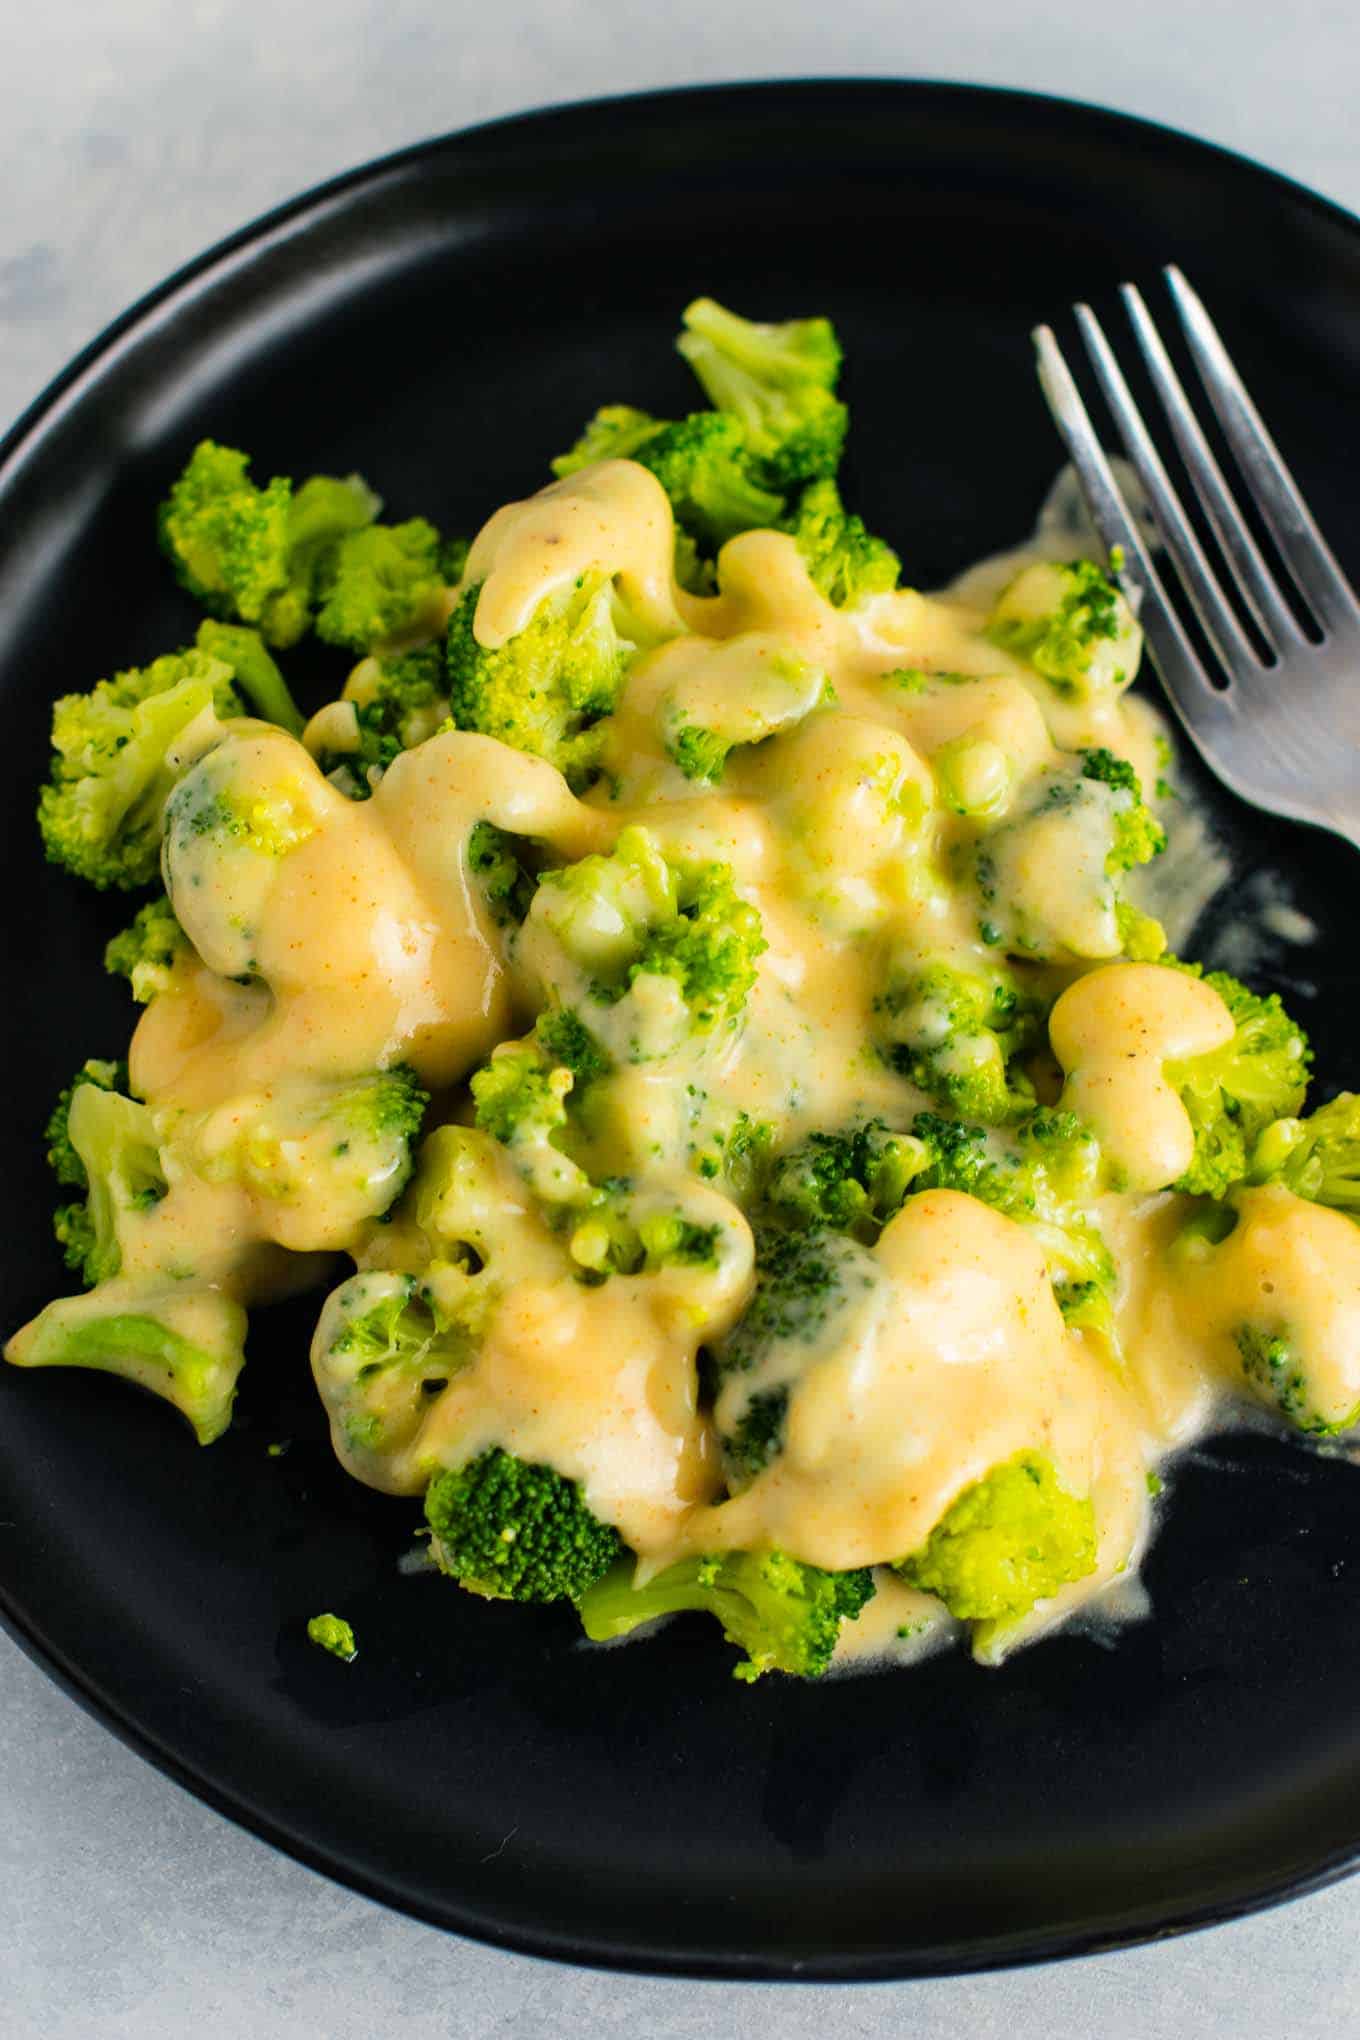 Easy cheddar cheese sauce for vegetables. A great way to get your kids to eat more veggies! (gluten free) #cheddarcheesesauce #cheesesauceforbroccoli #cheesesauce #glutenfree #dinner #vegetables